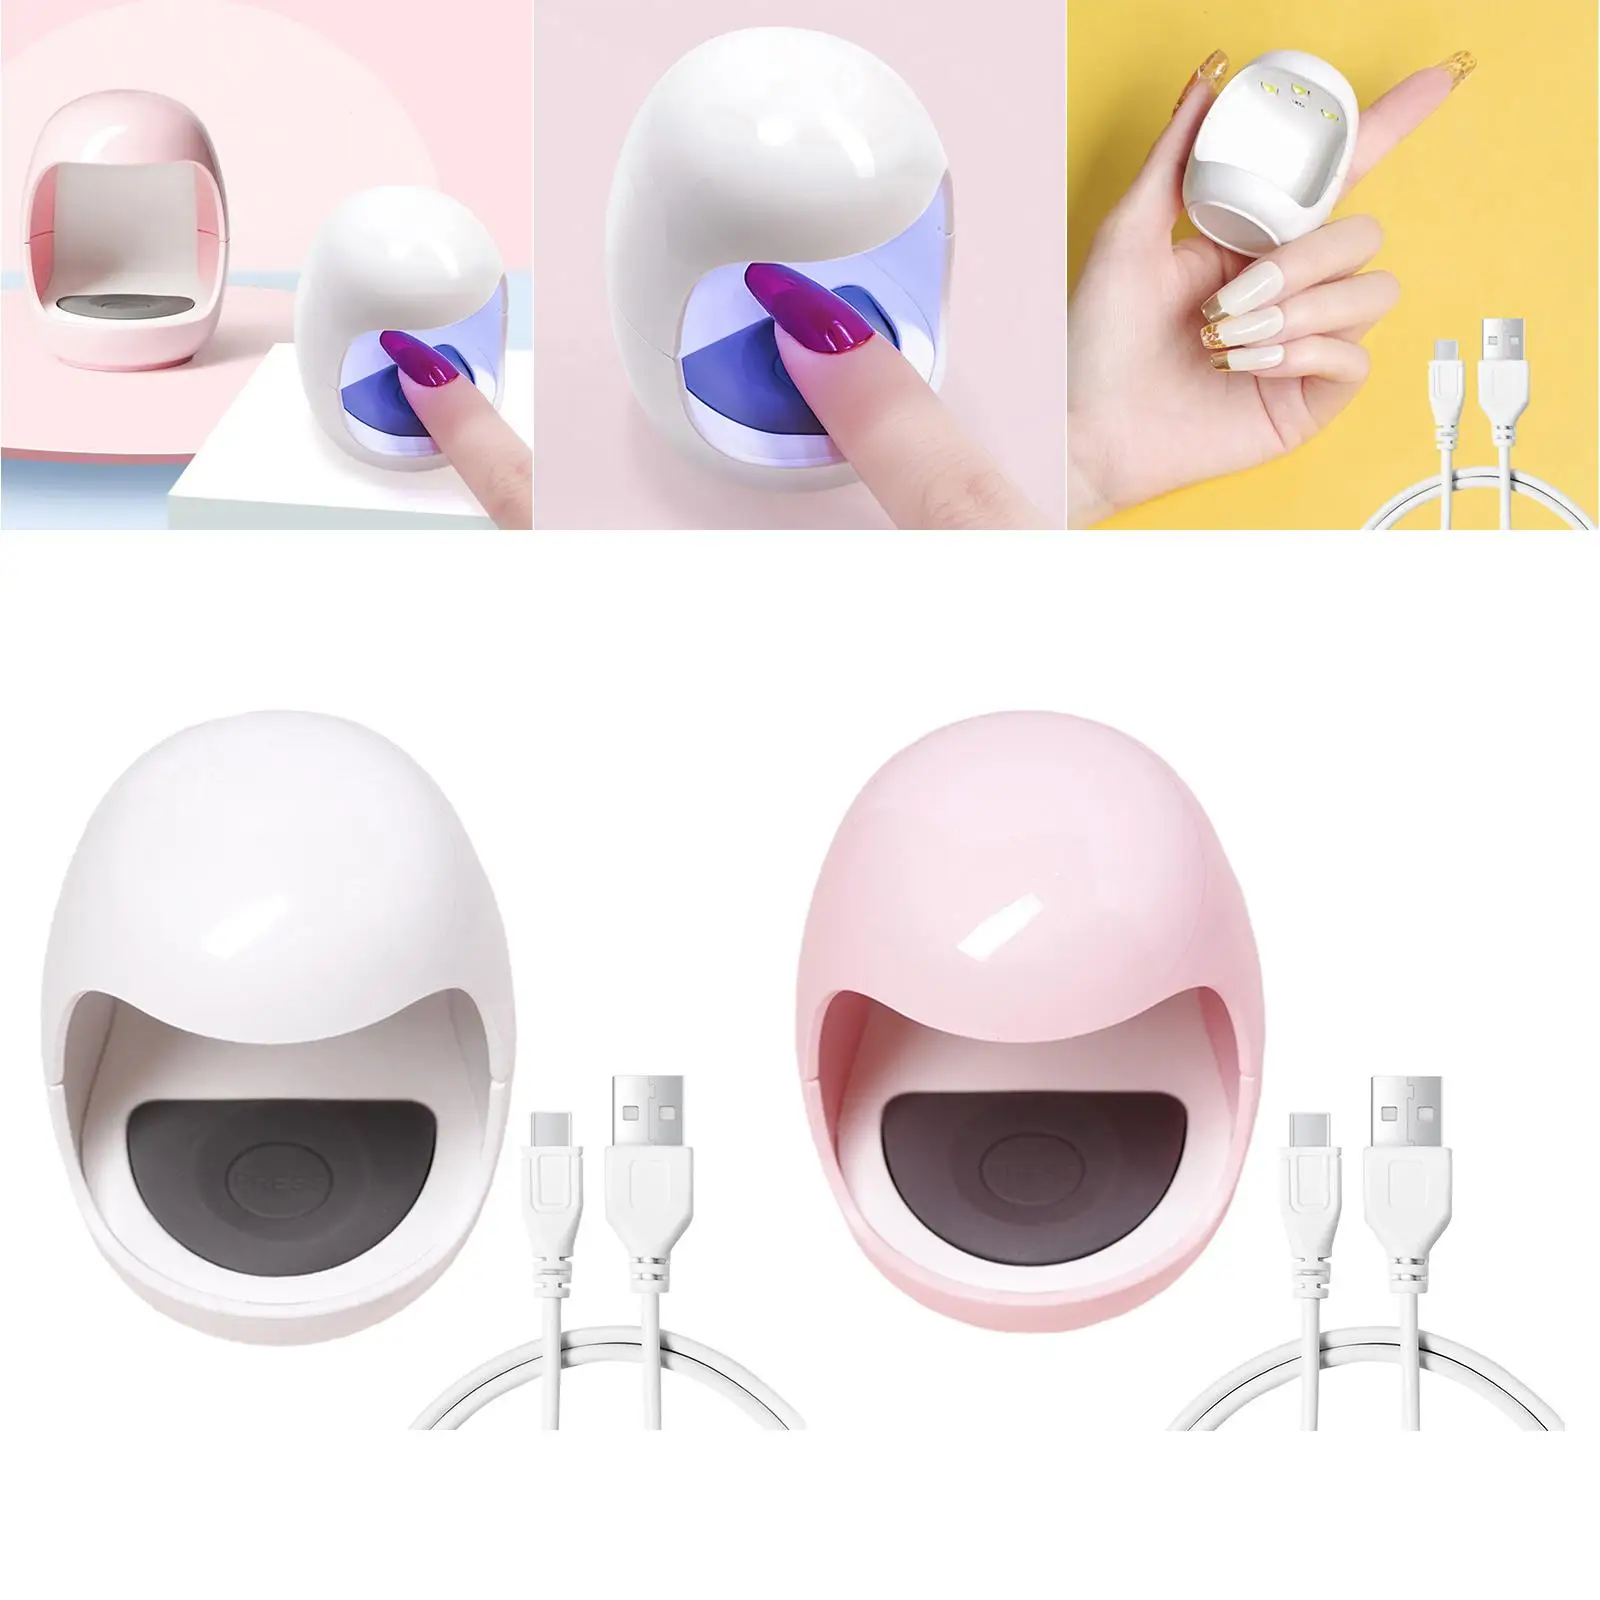 Nail Dryer USB Charge Fast Finger Nails Art Tool Nail Polish Curing Lamps for Gel Polish School Kids Acrylic Nails Accessories